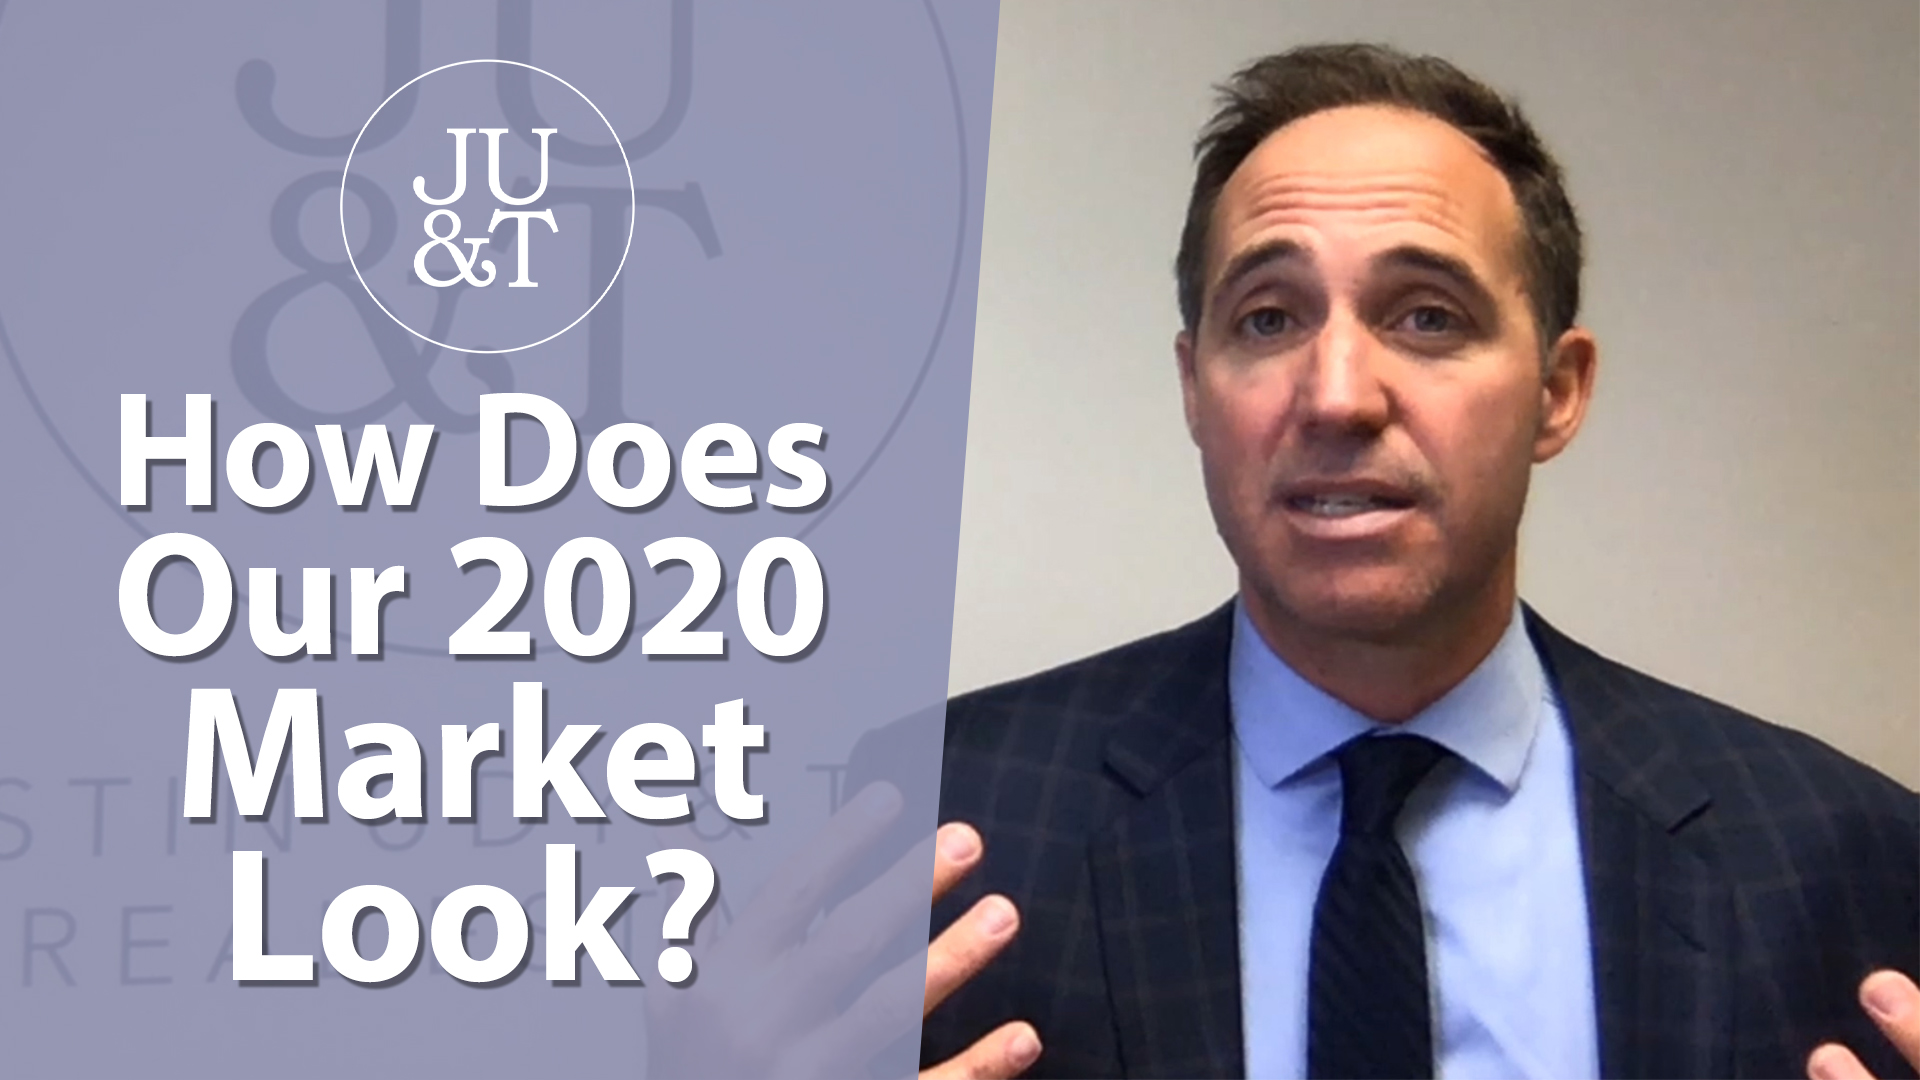 Q: What Can We Expect For Our 2020 Market?